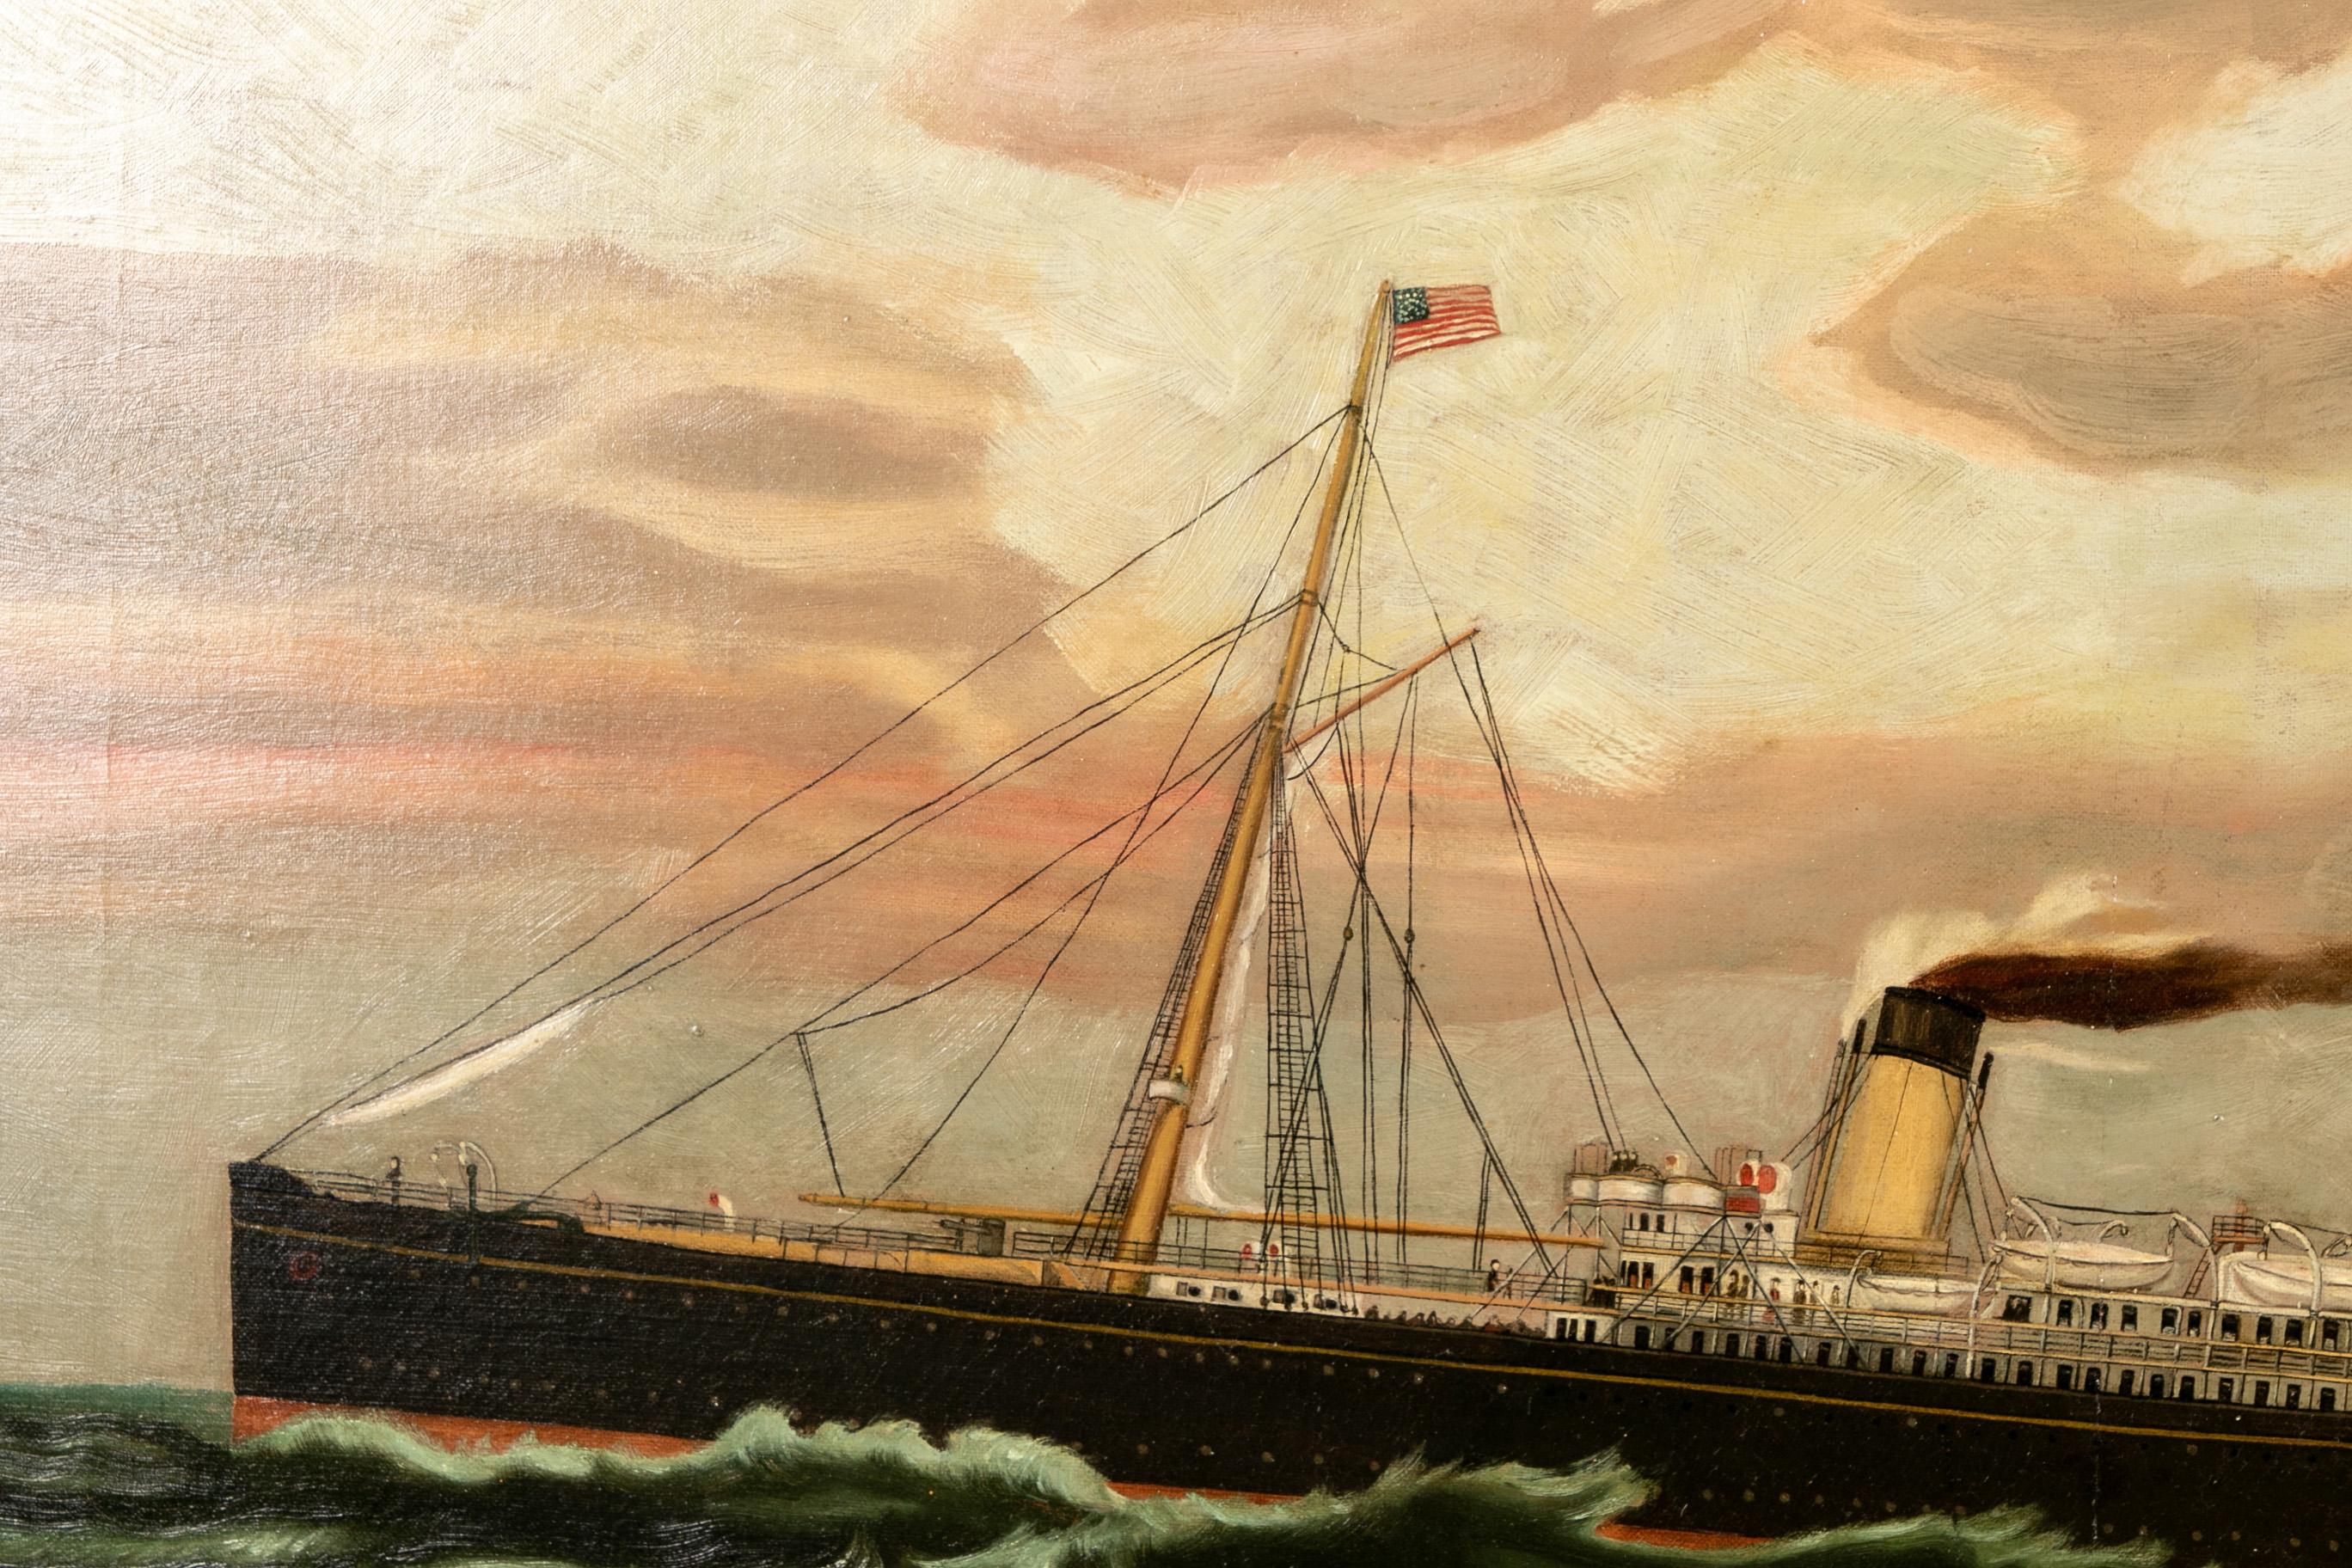 19th century oil on canvas depicting a mail steamer sailing under an evening sky. Garnishing American & English flags, passengers can be seen conversing and wandering the deck. Appearing to be unsigned, the painting is mounted in a contemporary